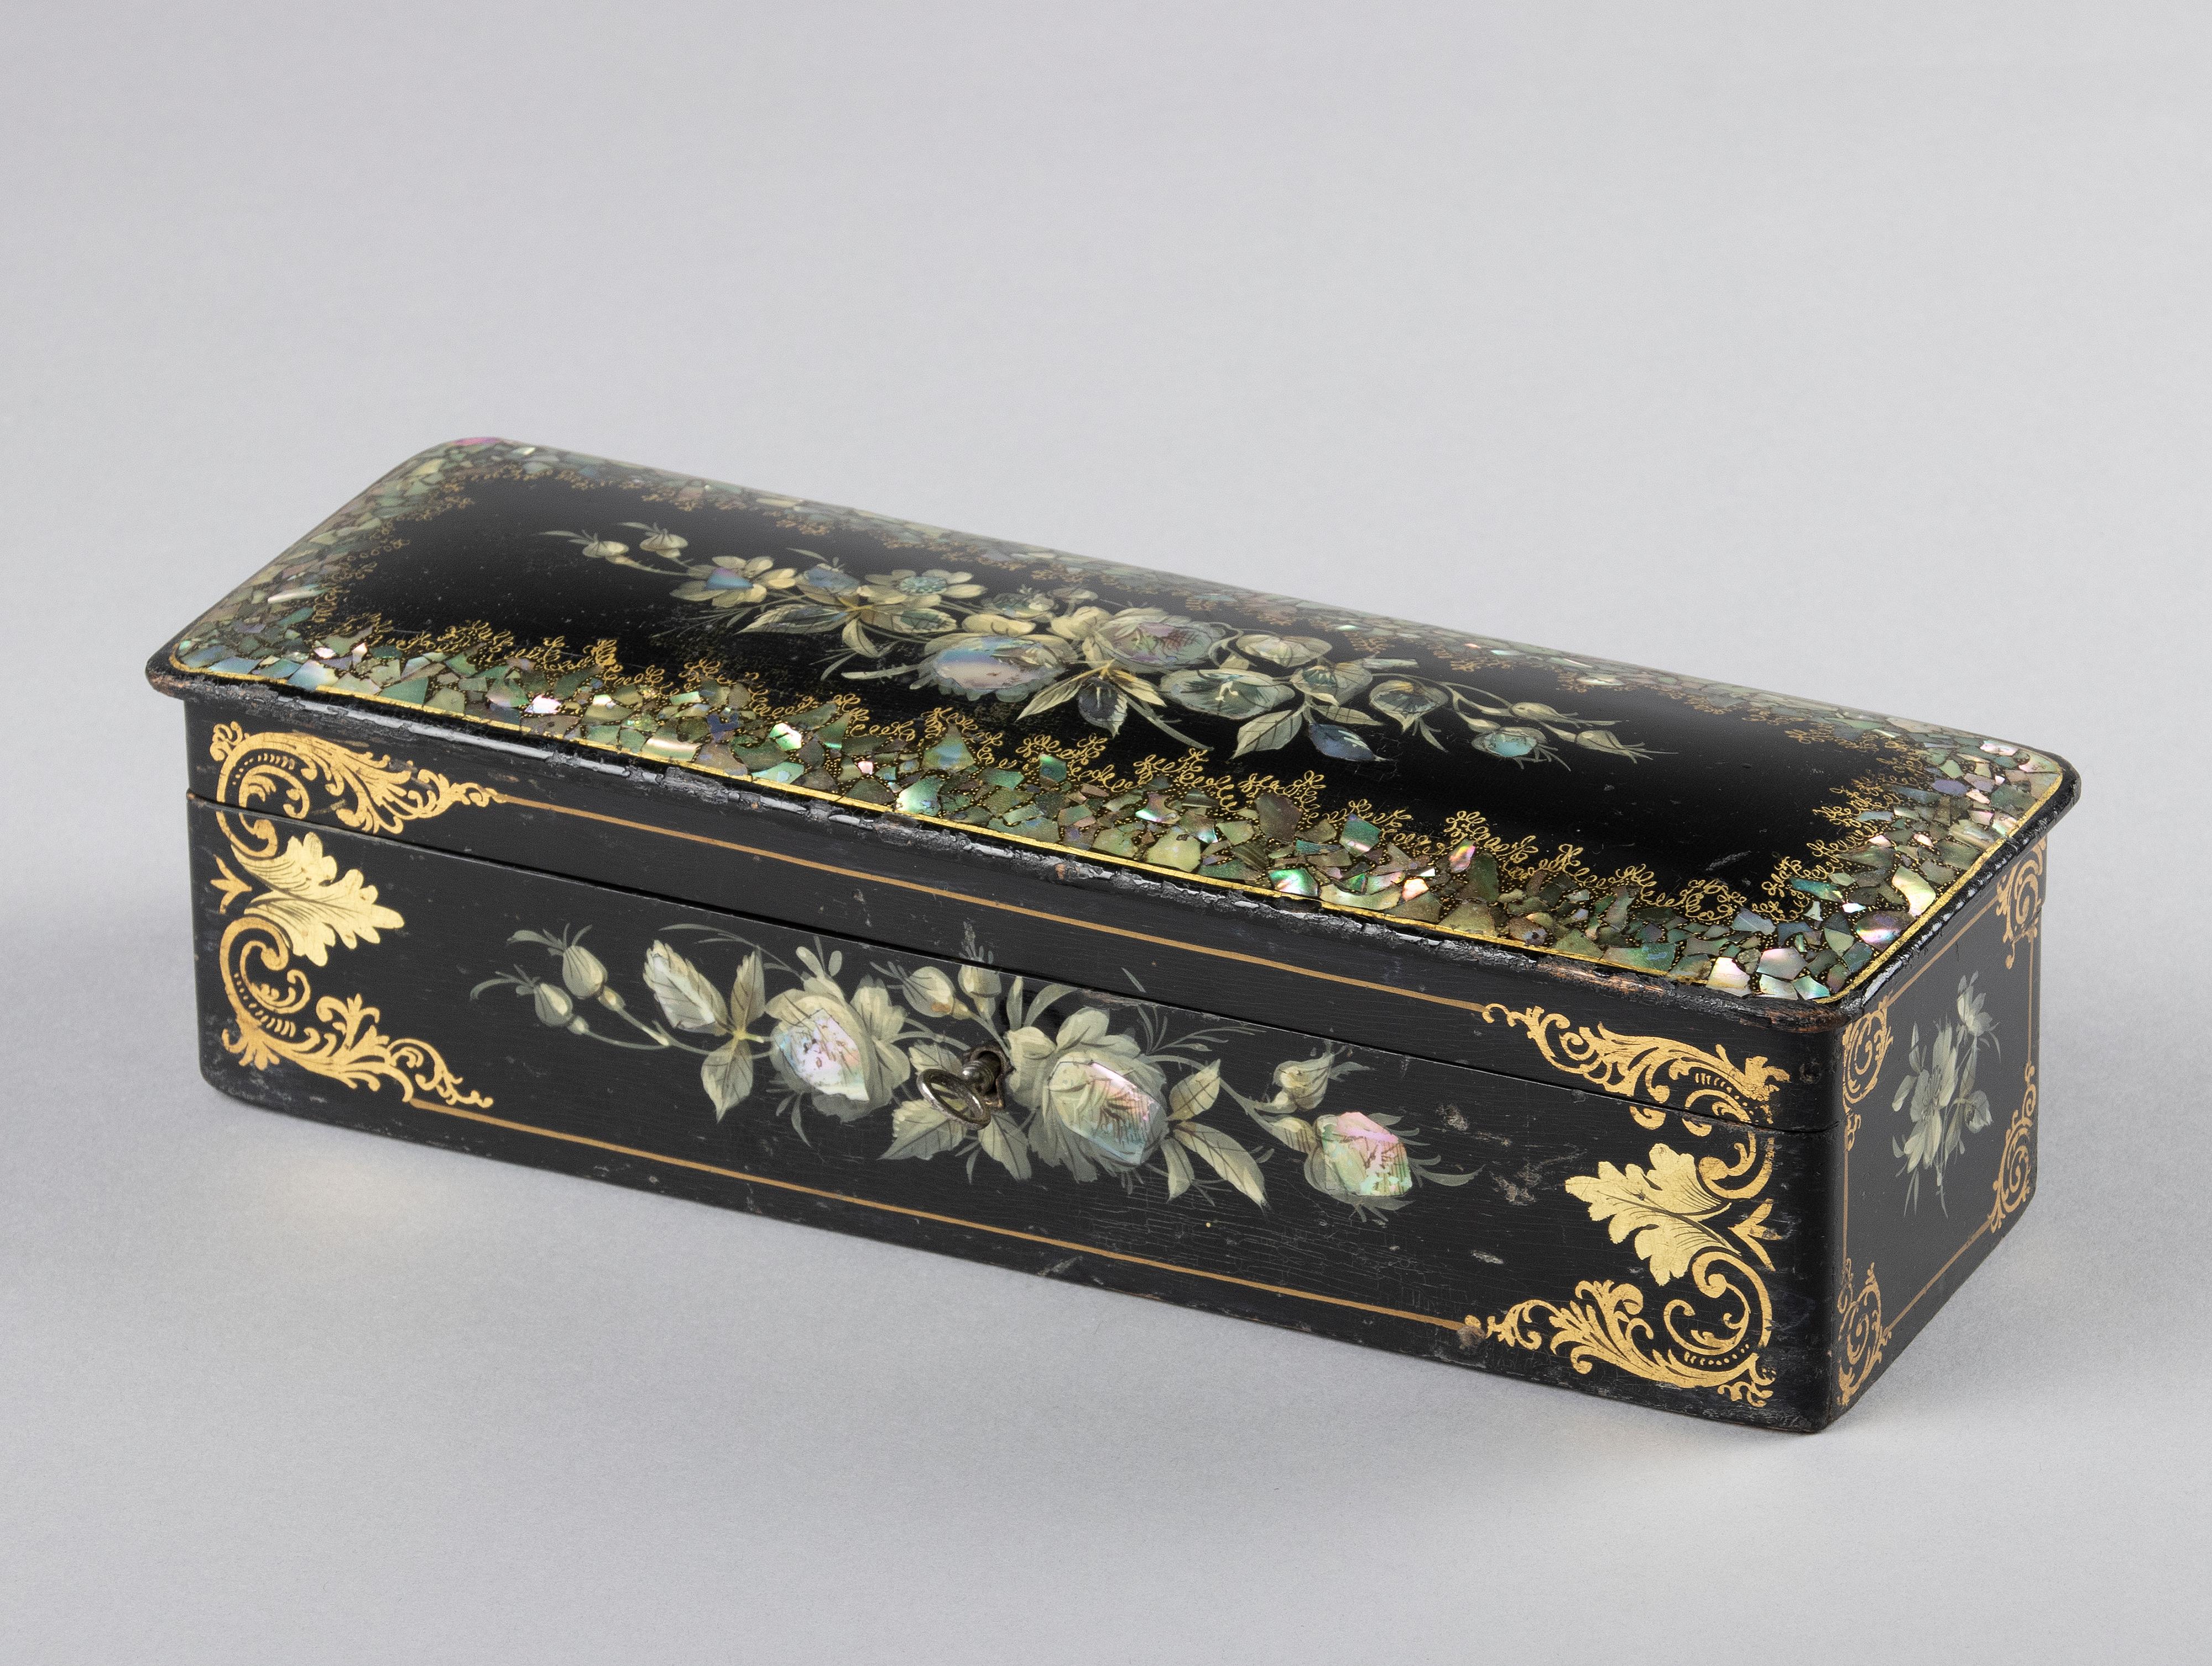 Beautiful antique box from the Victorian style period. The box is made of black lacquered wood, hand painted with gold flowers and inlaid with mother-of-pearl. The inside of the box is lined with pink silk.
The box has normal signs of use and age